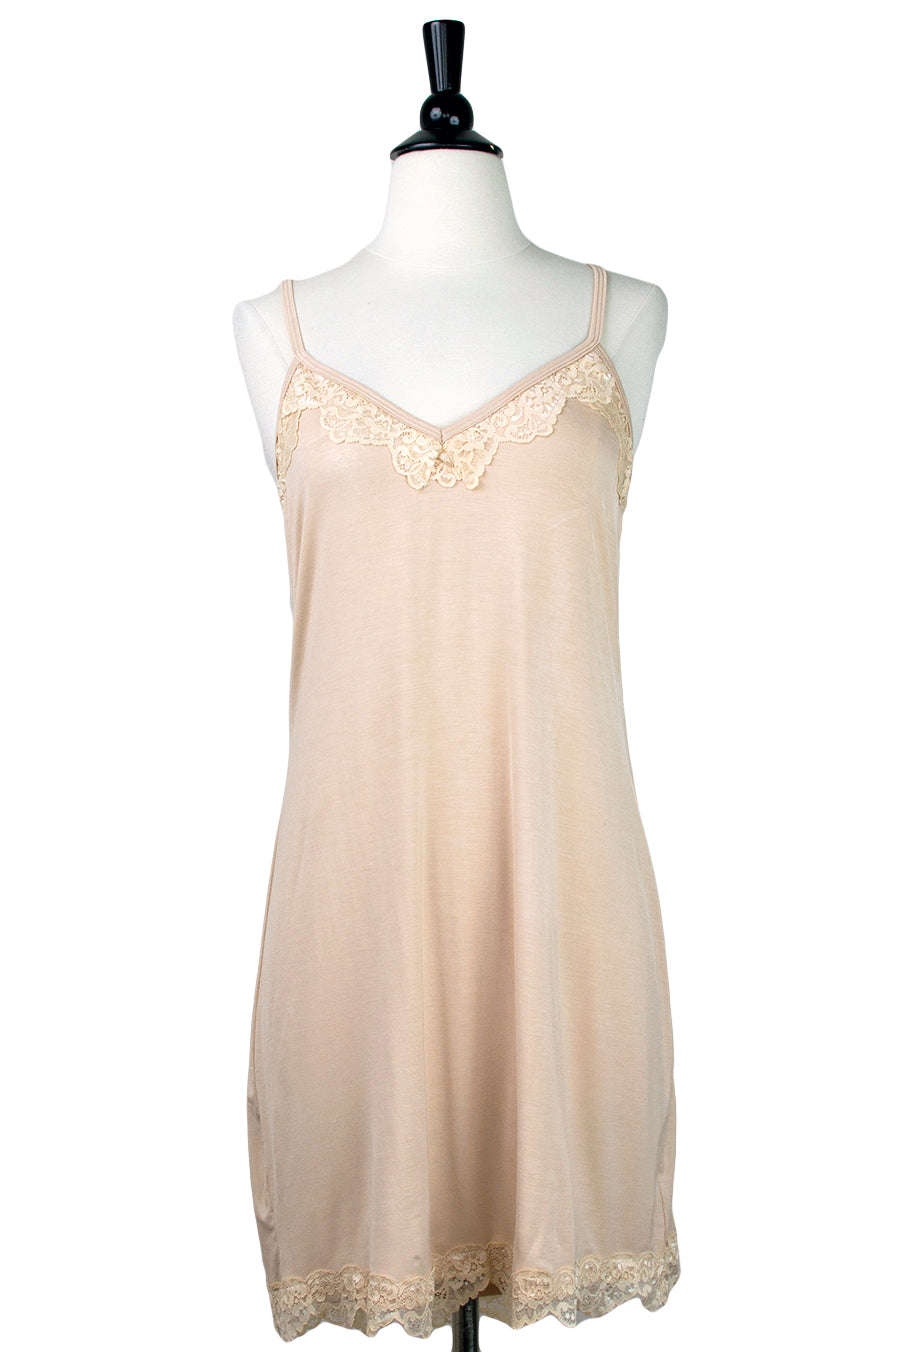 Some Days Slip Dress in Sand by Aratta - Hourglass Boutique